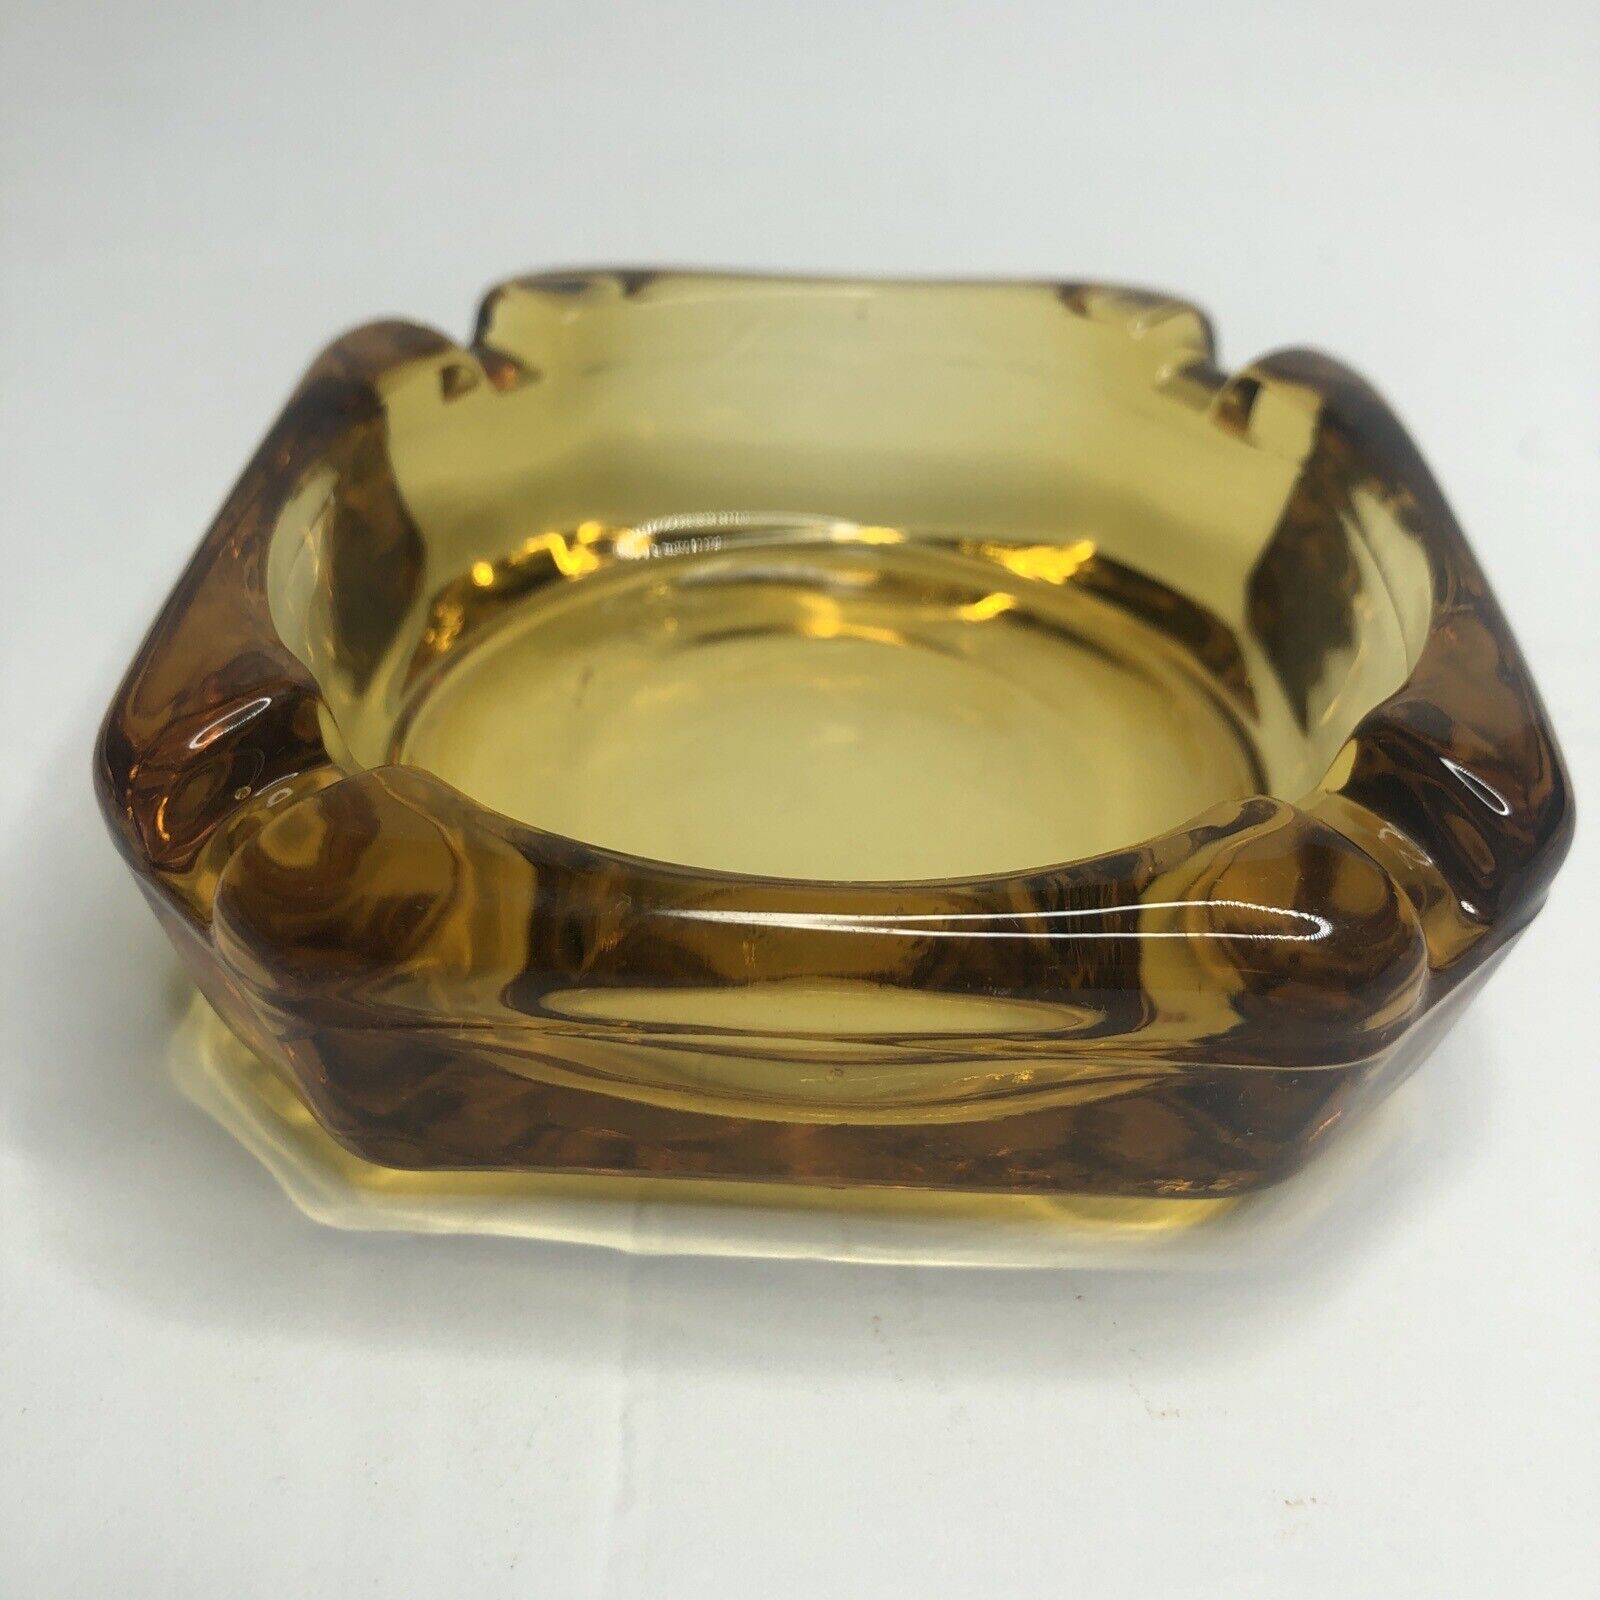 Vintage Mid Century 3.5”Square Amber Glass Ashtray Very Good Condition